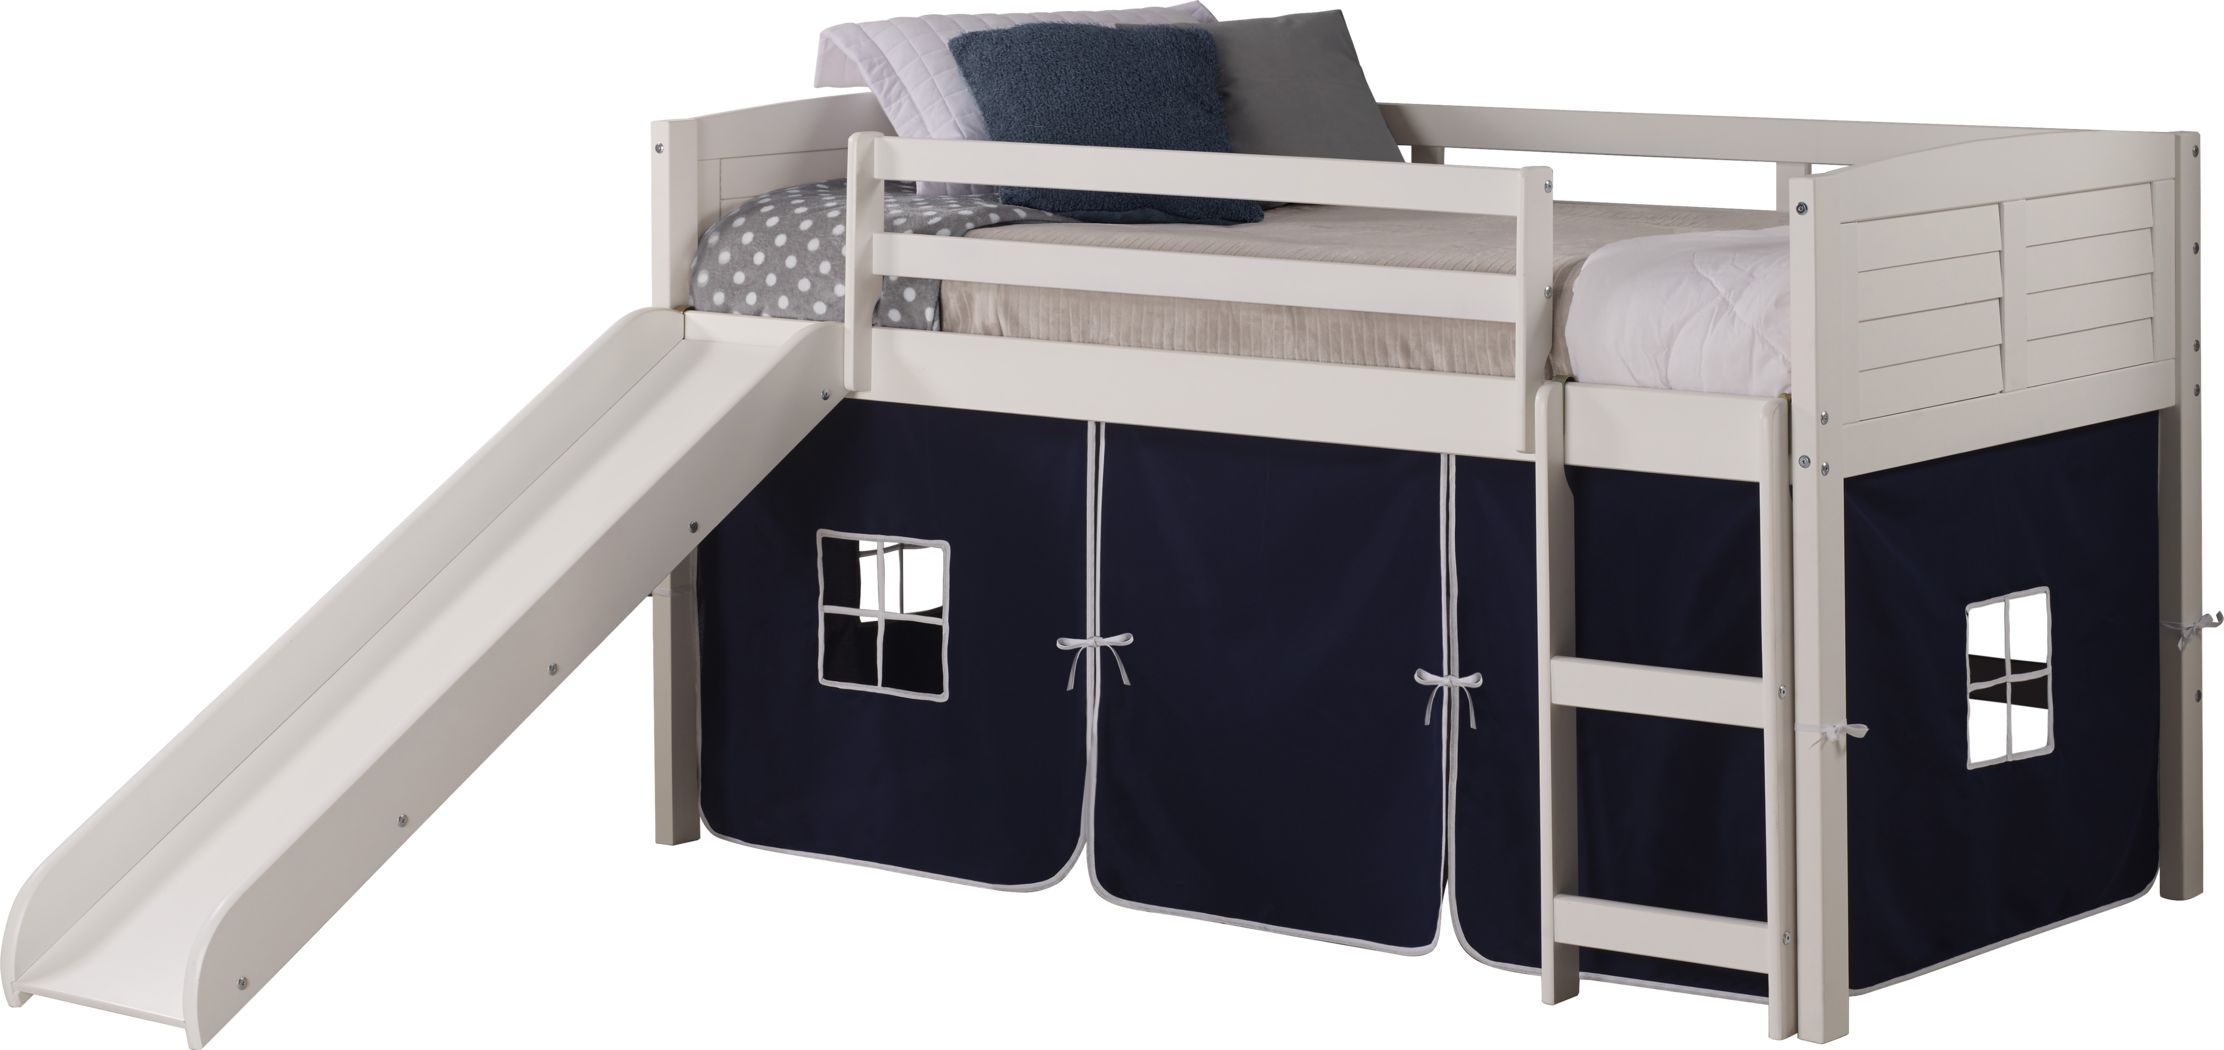 L Shaped Bunk Beds With Slide Free, Kaitlyn L Shaped Twin Over Full Bunk Bed